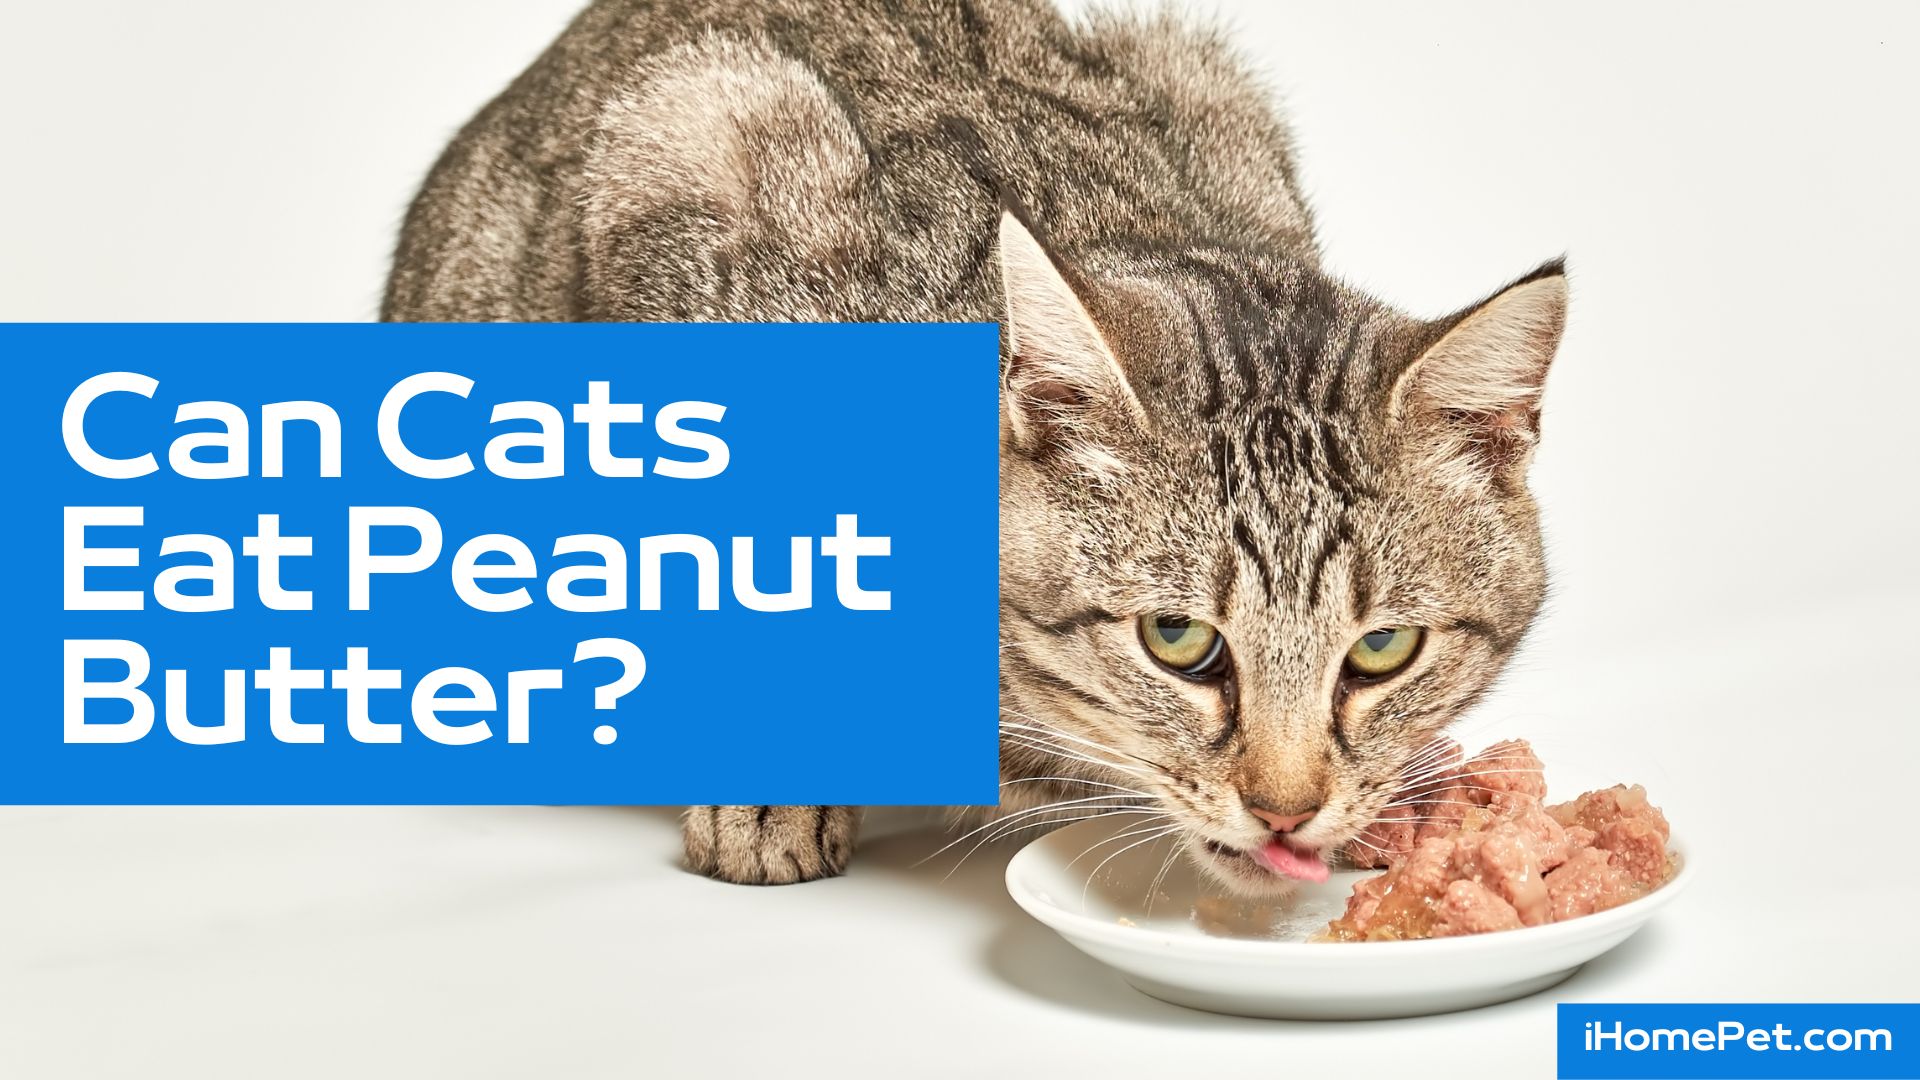 Feeding your cat peanut butter